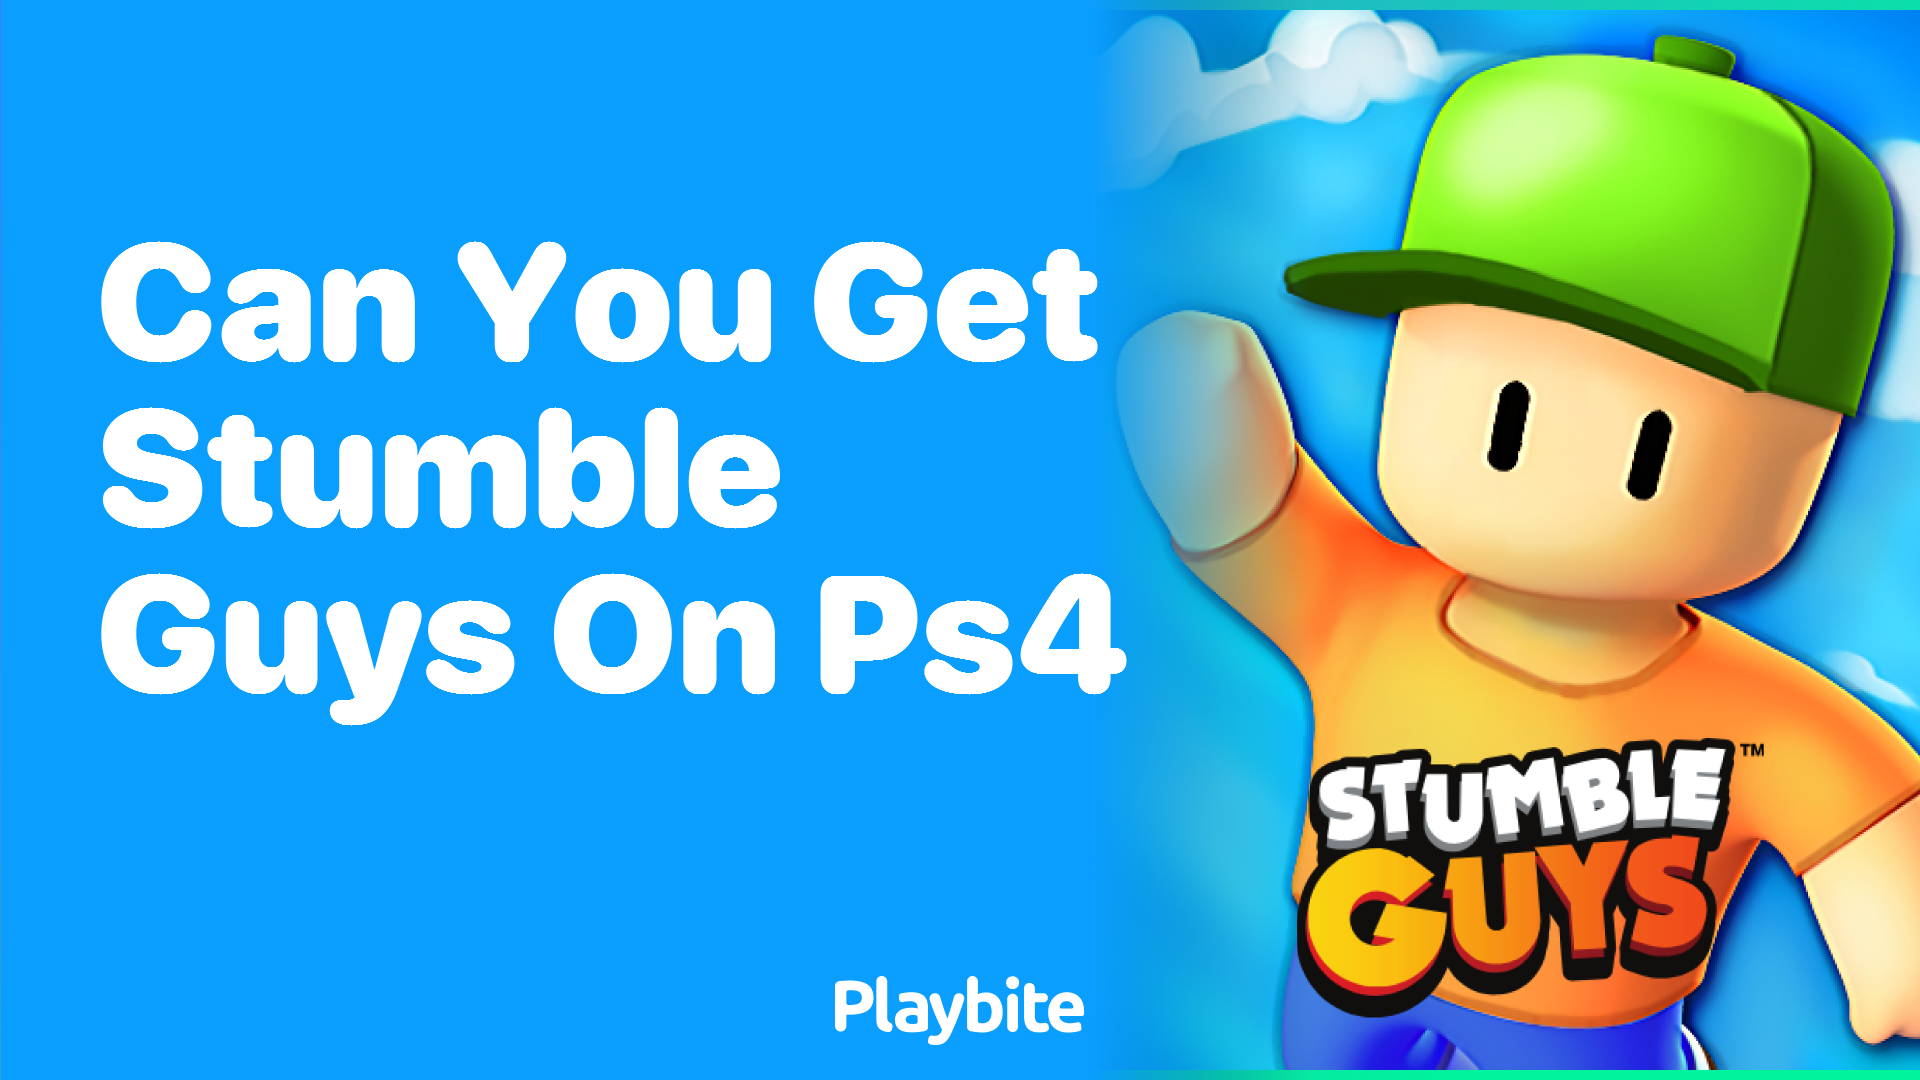 Can You Get Stumble Guys on PS4?